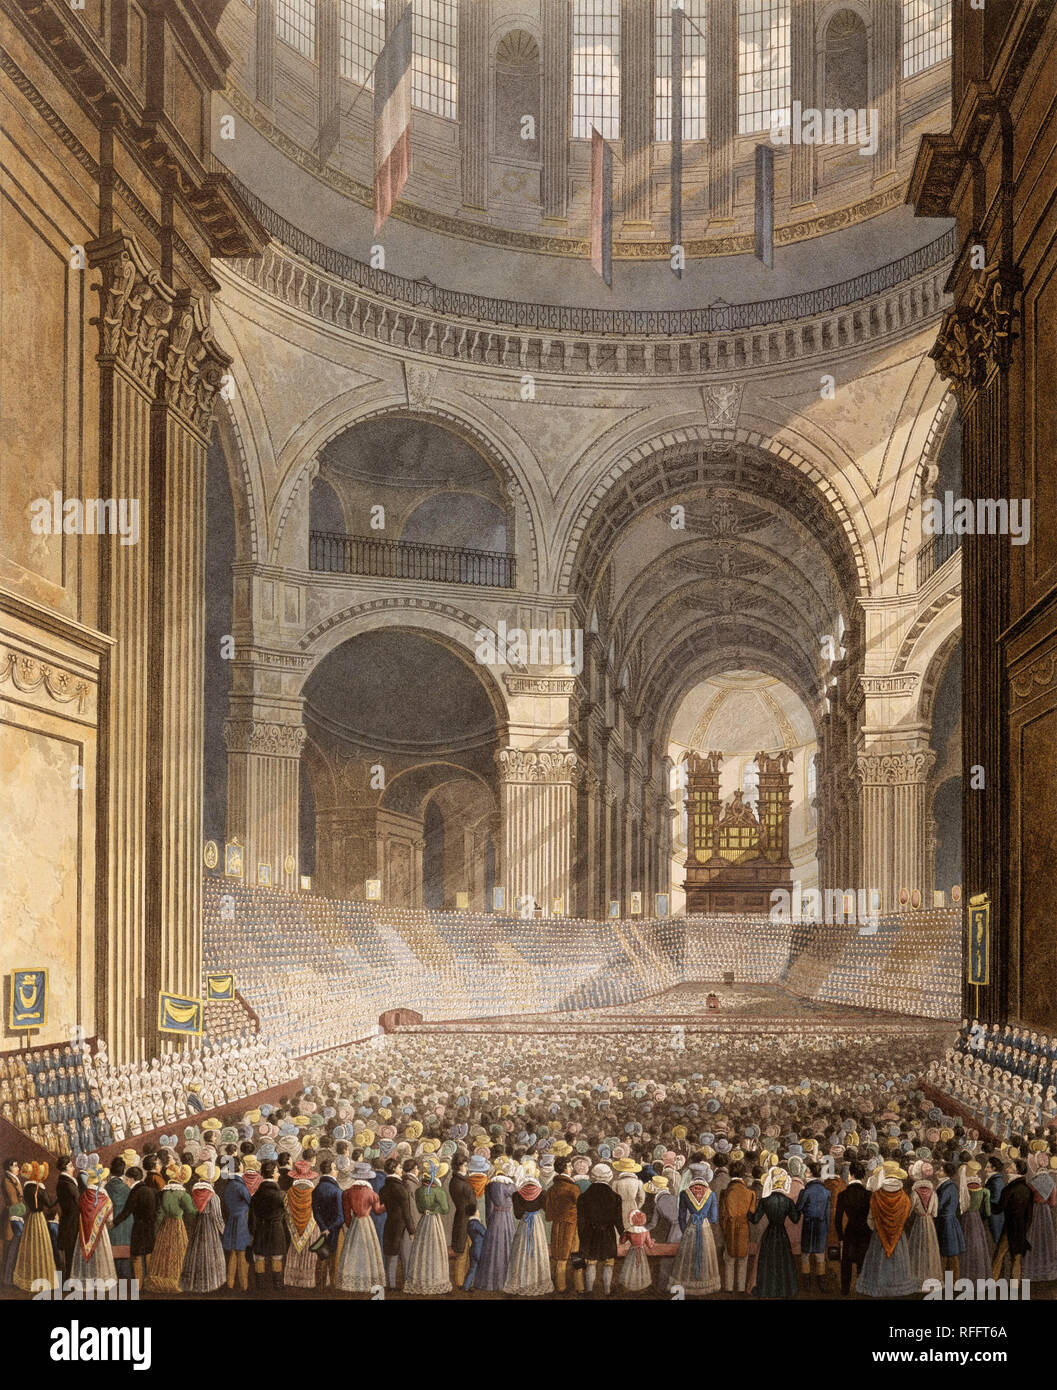 Watercolour - The Anniversary Meeting of the Charity Children in the Cathedral of St. Paul. Date/Period: 1826. Paintings, Prints and Drawings. Paper; ink; watercolour. Author: Robert Havell. Stock Photo